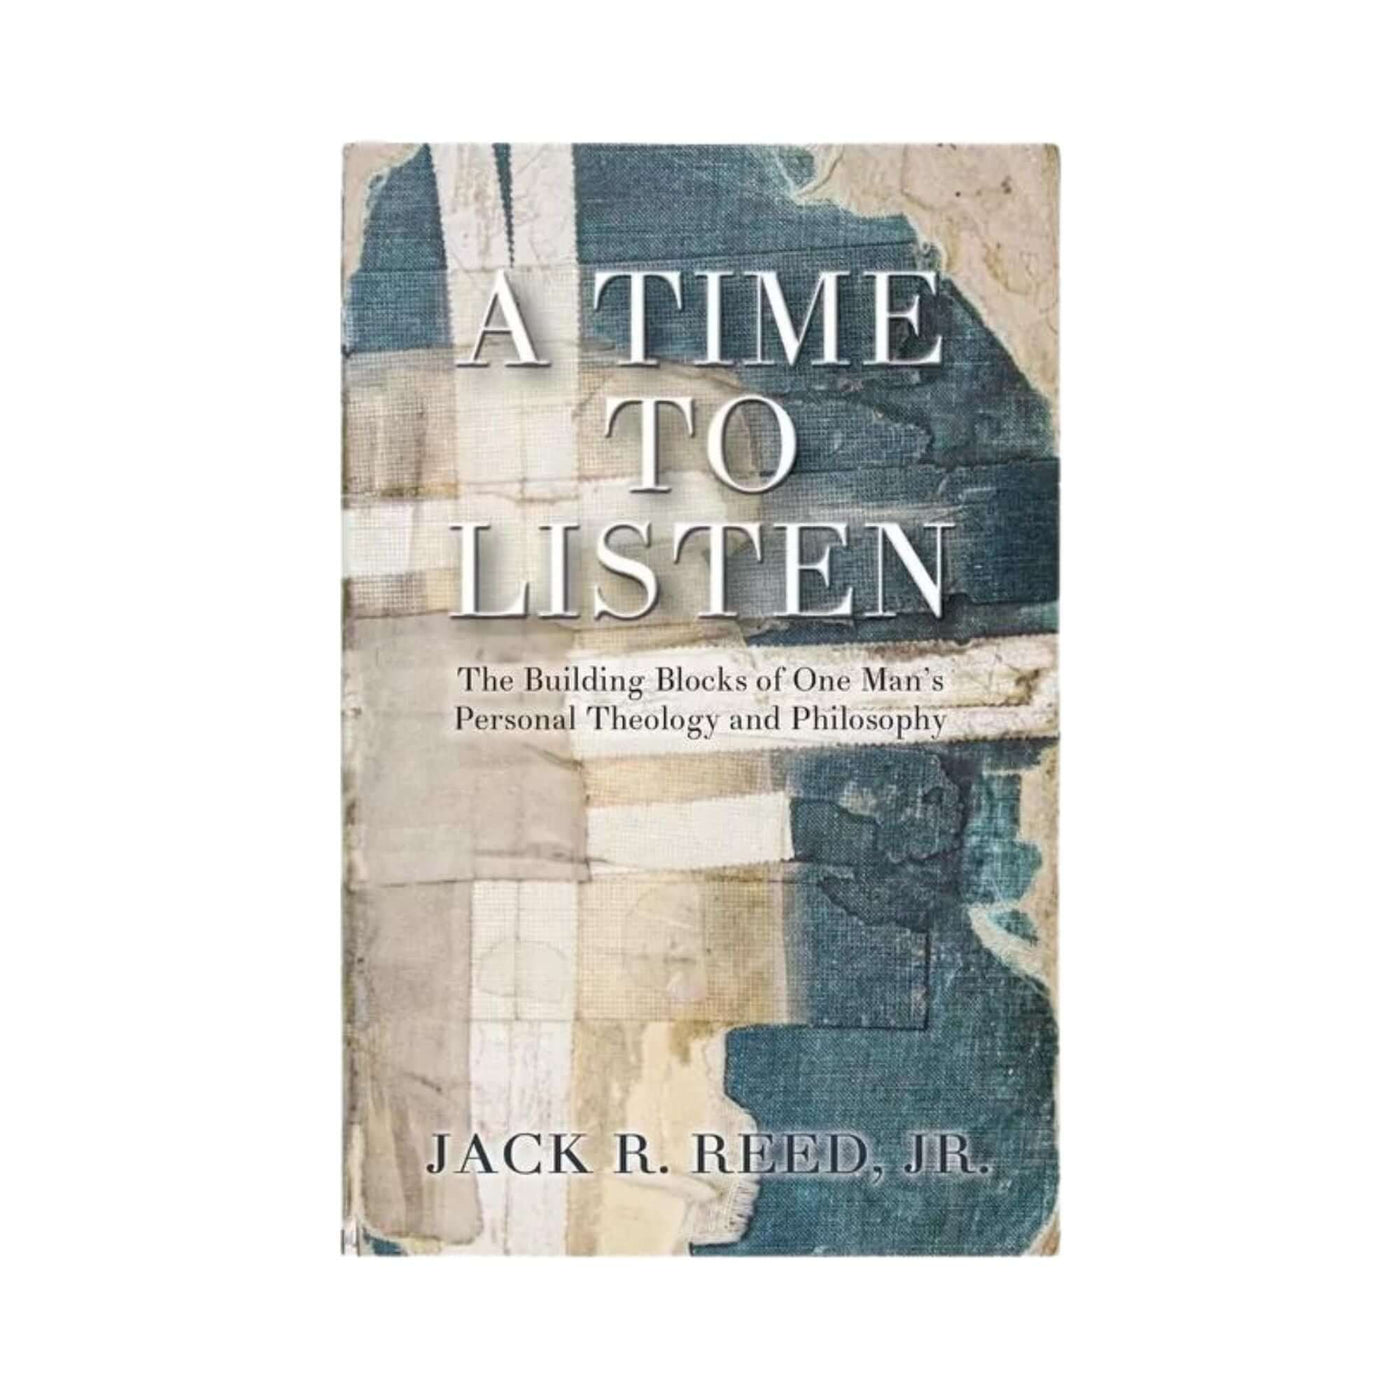 A Time To Listen by Jack Reed, Jr.